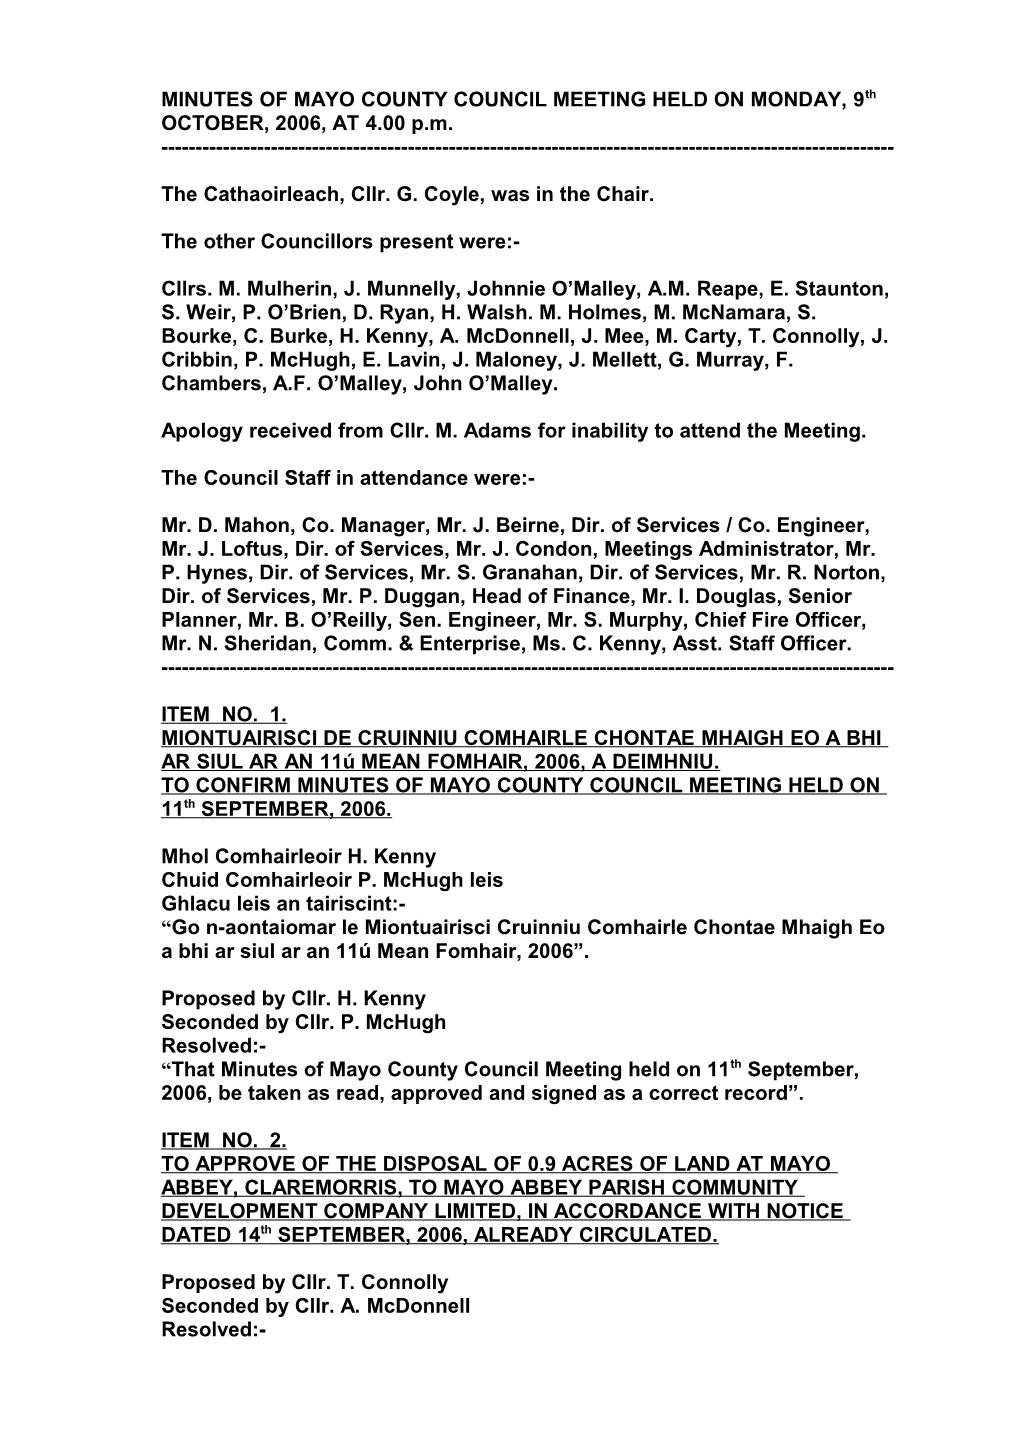 MINUTES of MAYO COUNTY COUNCIL MEETING HELD on MONDAY, 9Th OCTOBER, 2006, at 4